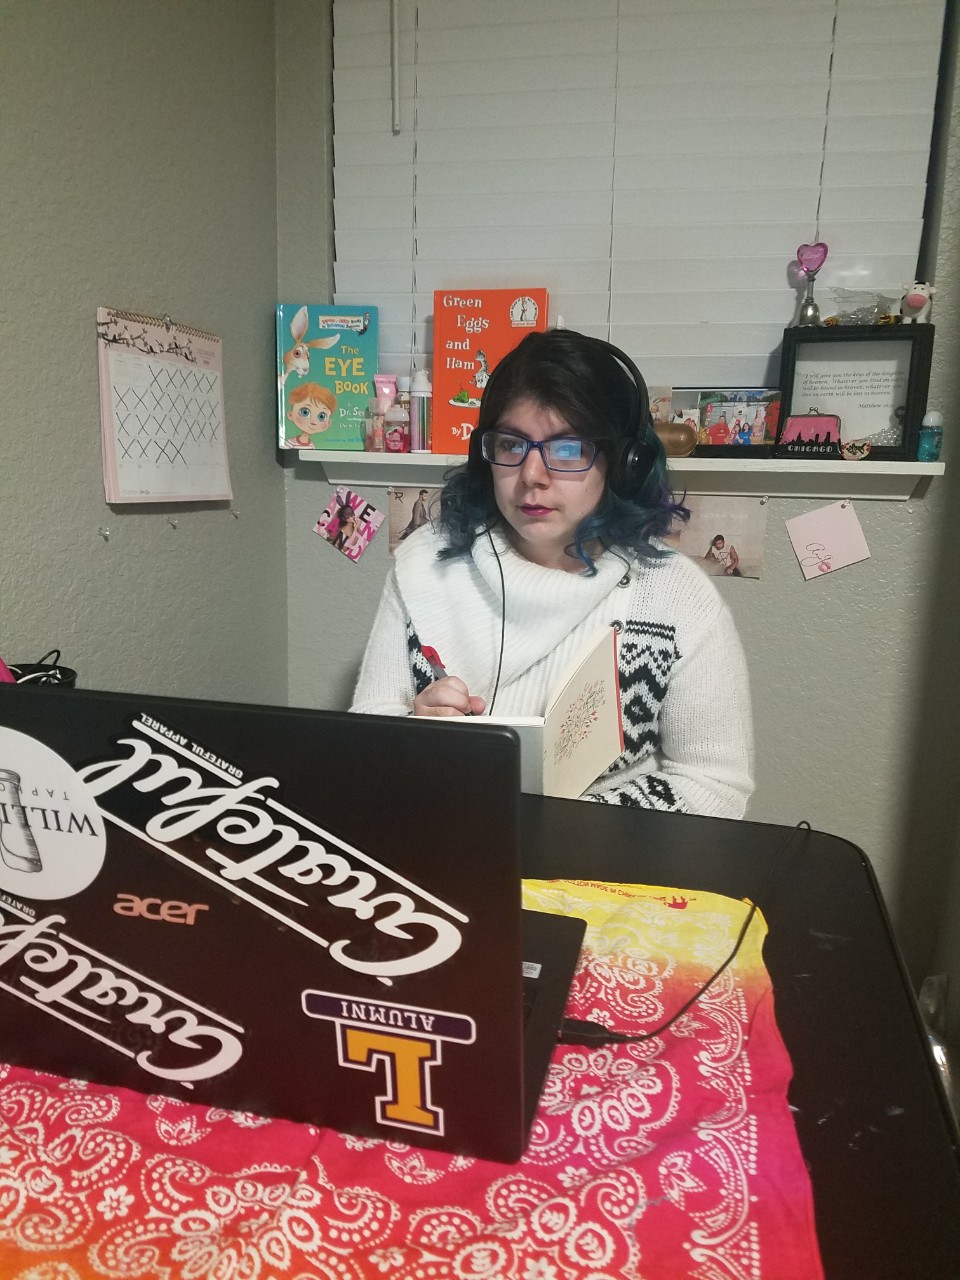 a young Latina woman sitting at a table in her home, looking at her laptop that is covered in stickers. She is wearing a big cozy white sweater and listening to headphones plugged into the computer.